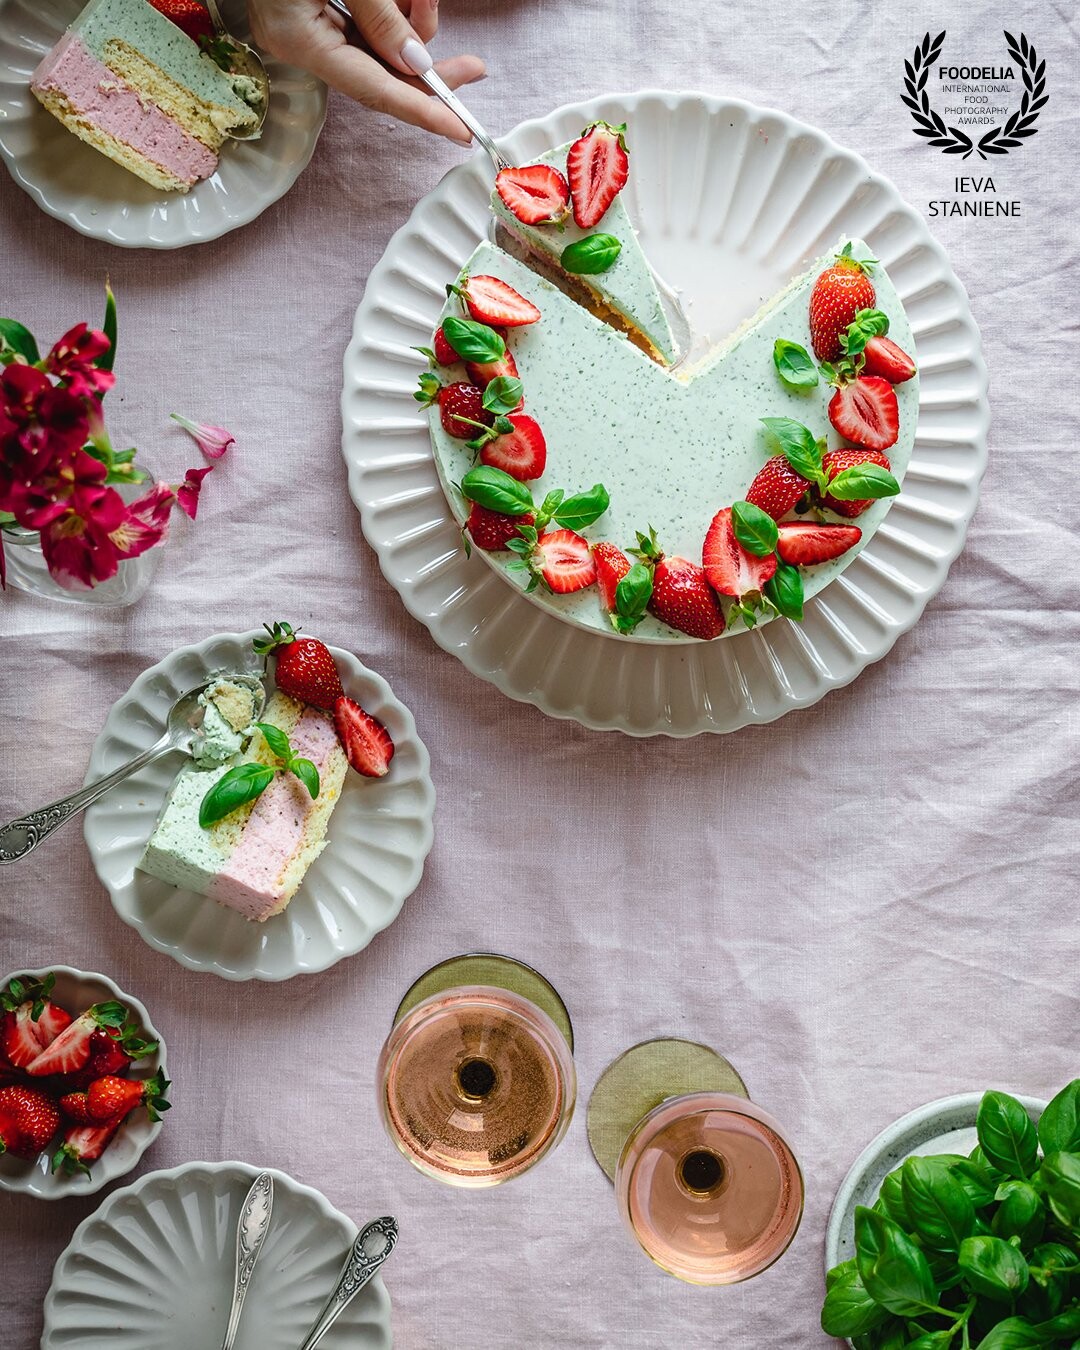 Basil and strawberries are a perfect taste and color combination meeting in this cake. <br />
Made in collaboration with a client in recipe creation and shooting.